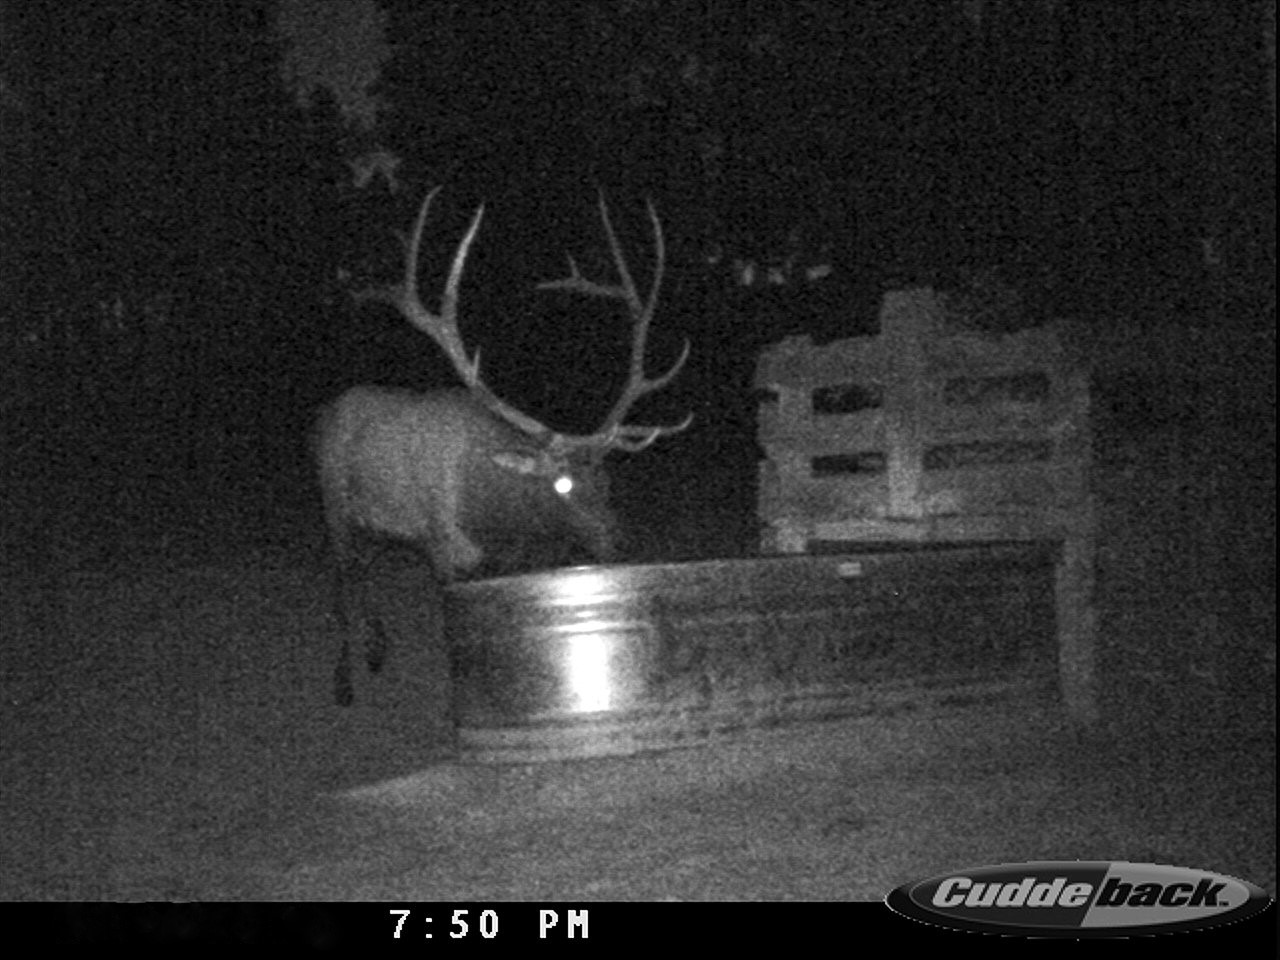 TrailCamCDY_0043 (2).JPG -  by Wild Bill Hiccup